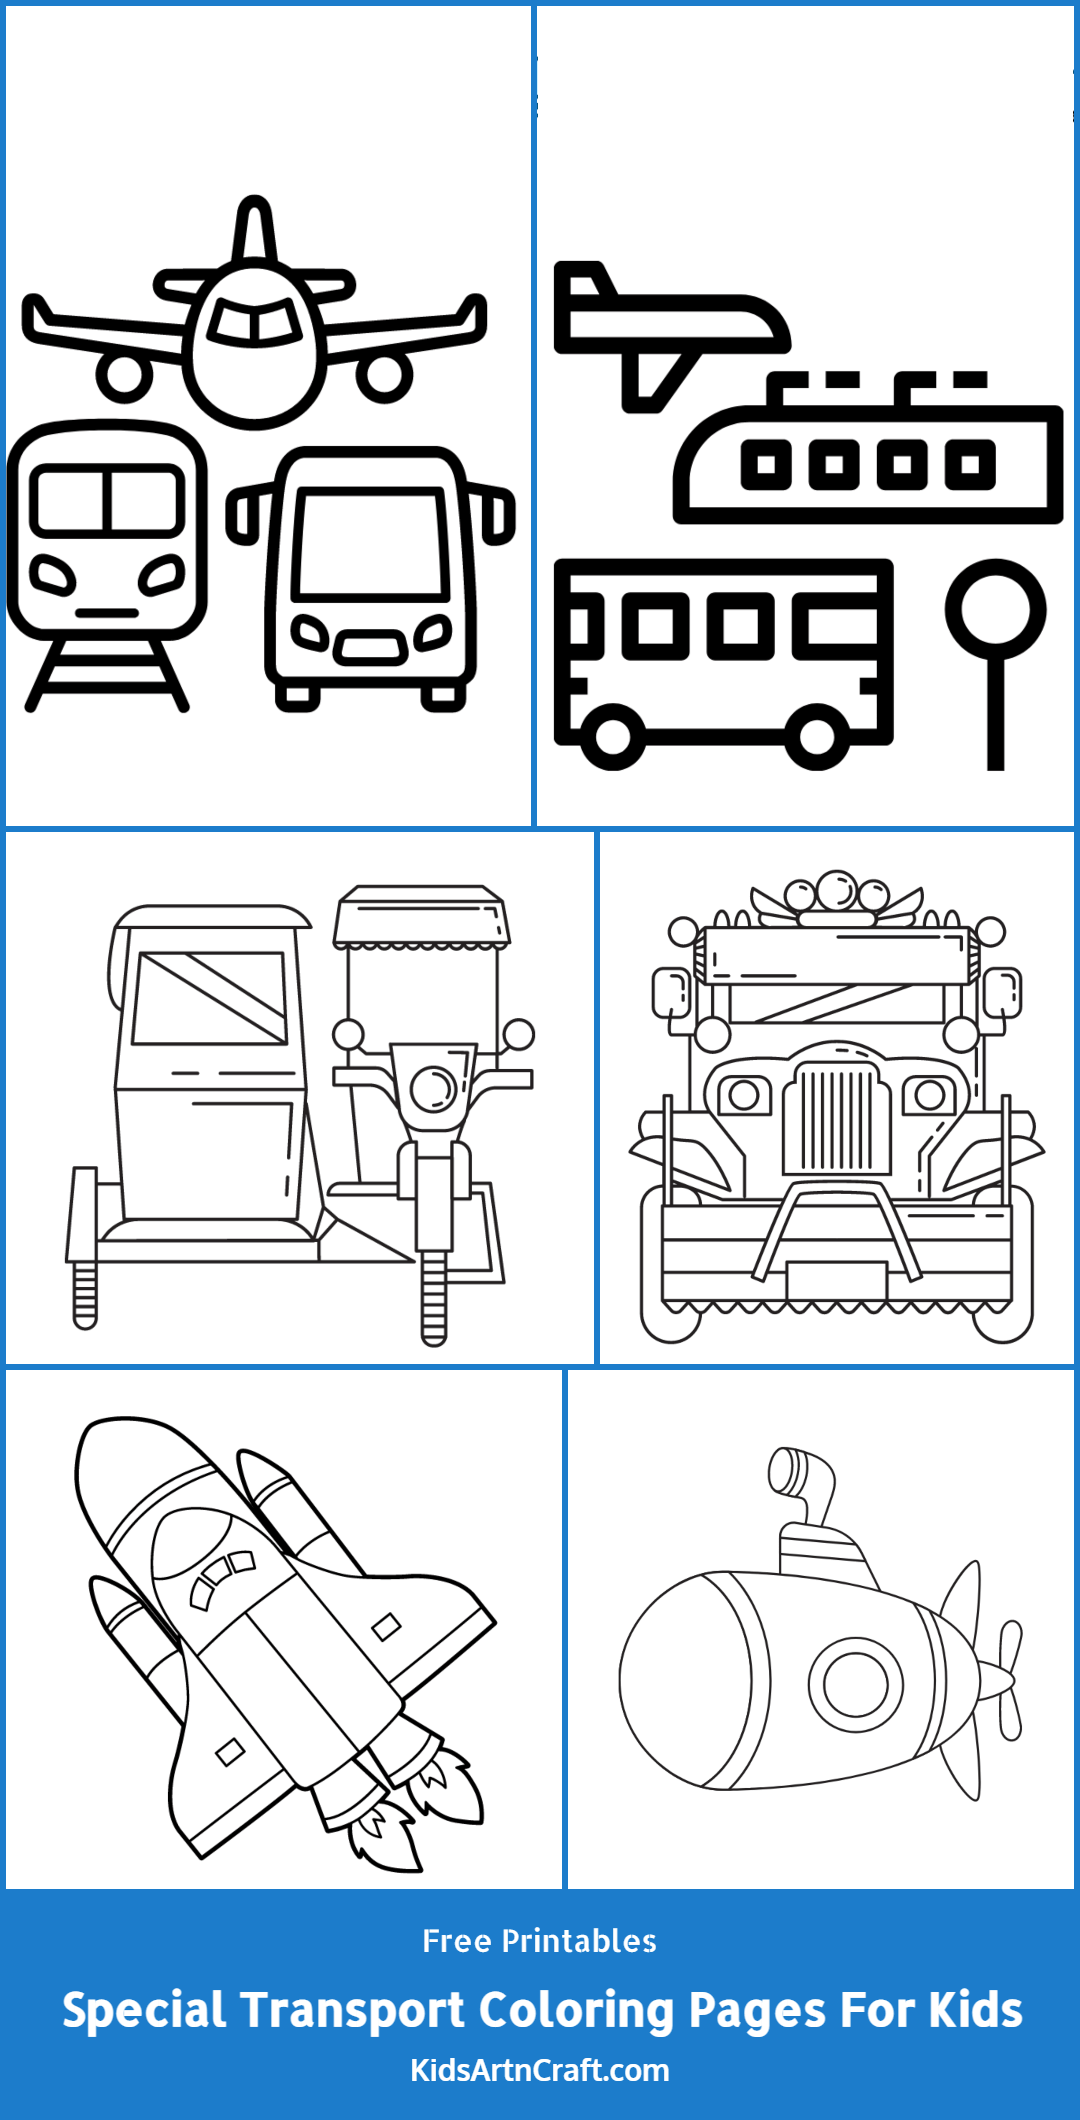 Special Transport Coloring Pages For Kids – Free Printable